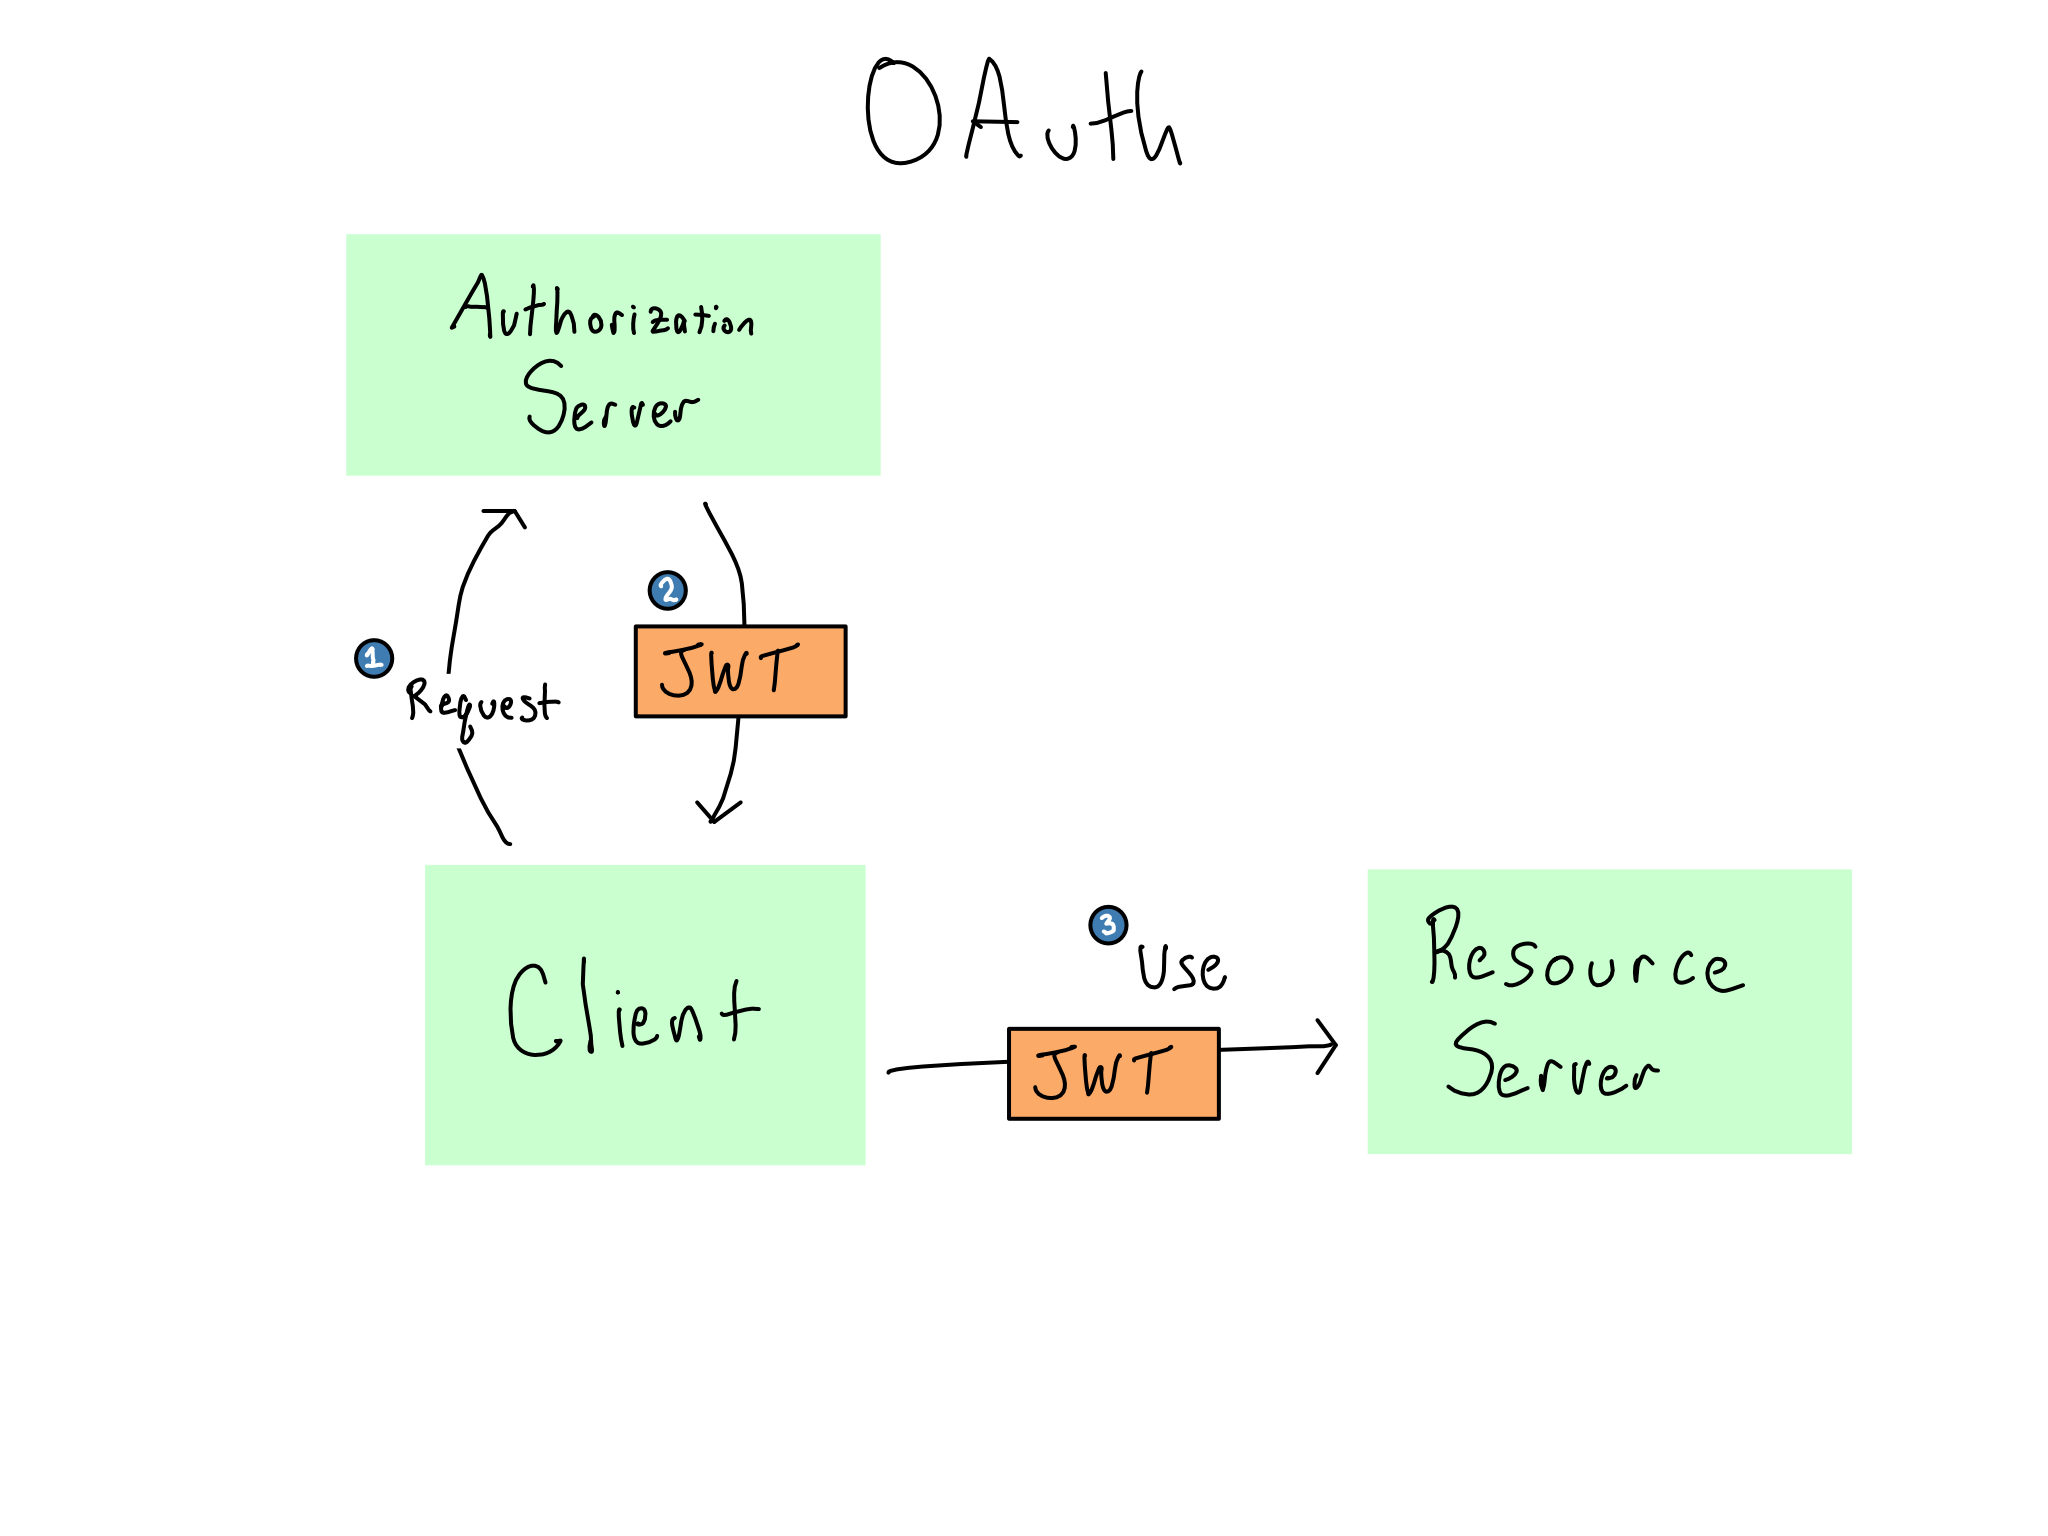 A visual representation of OAuth flow as described above.